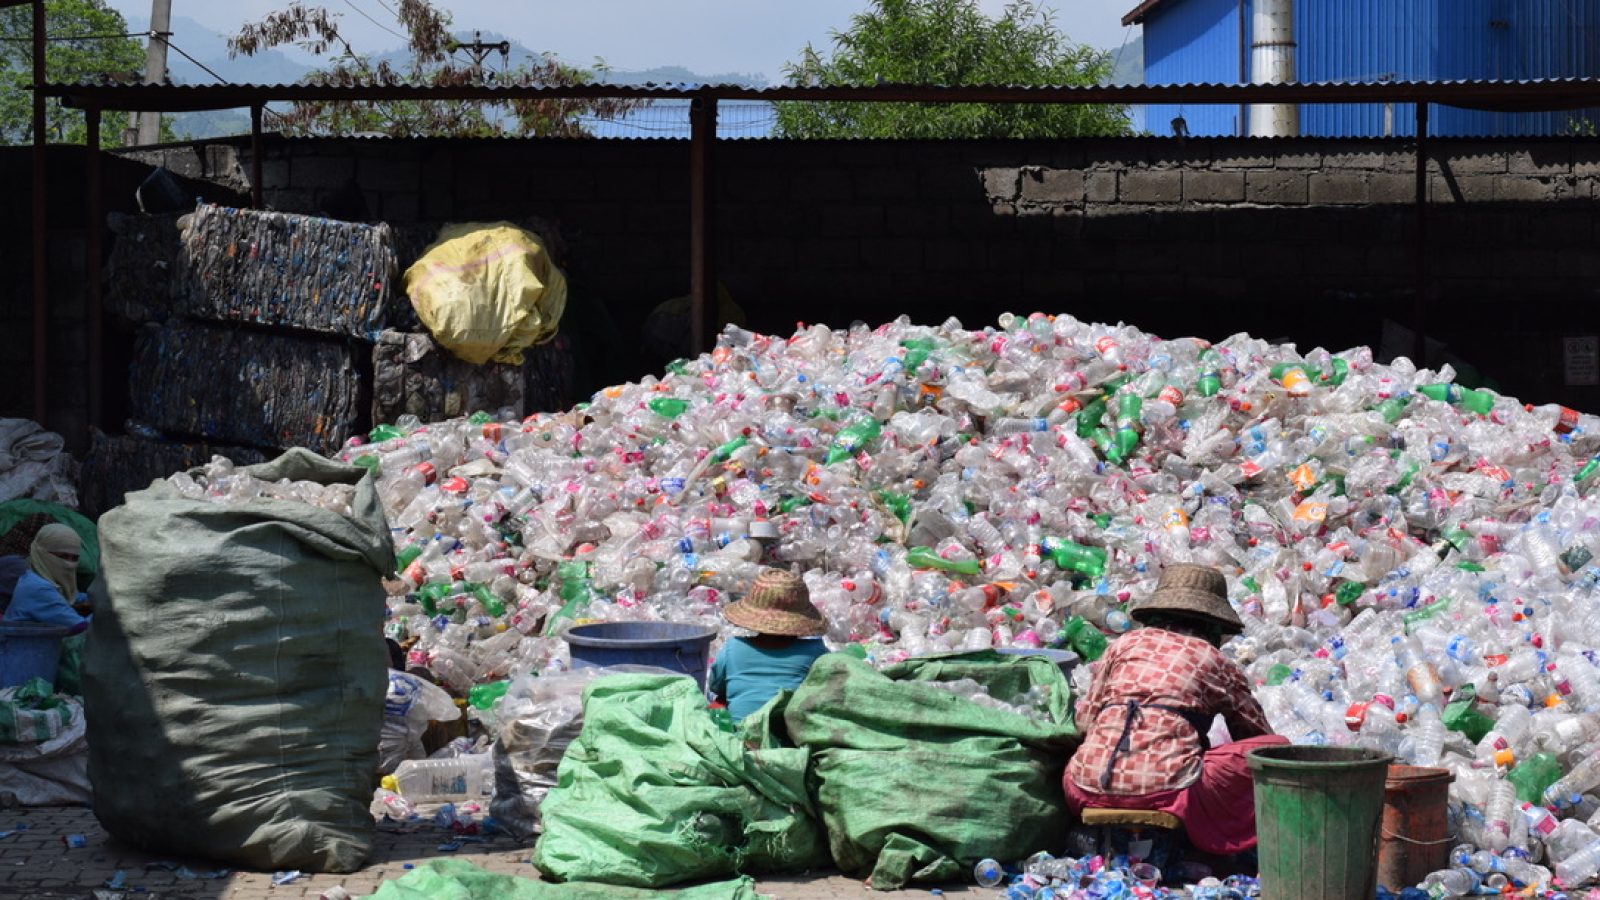 A large pile of empty plastic bottles with a woman sorting them into green bags